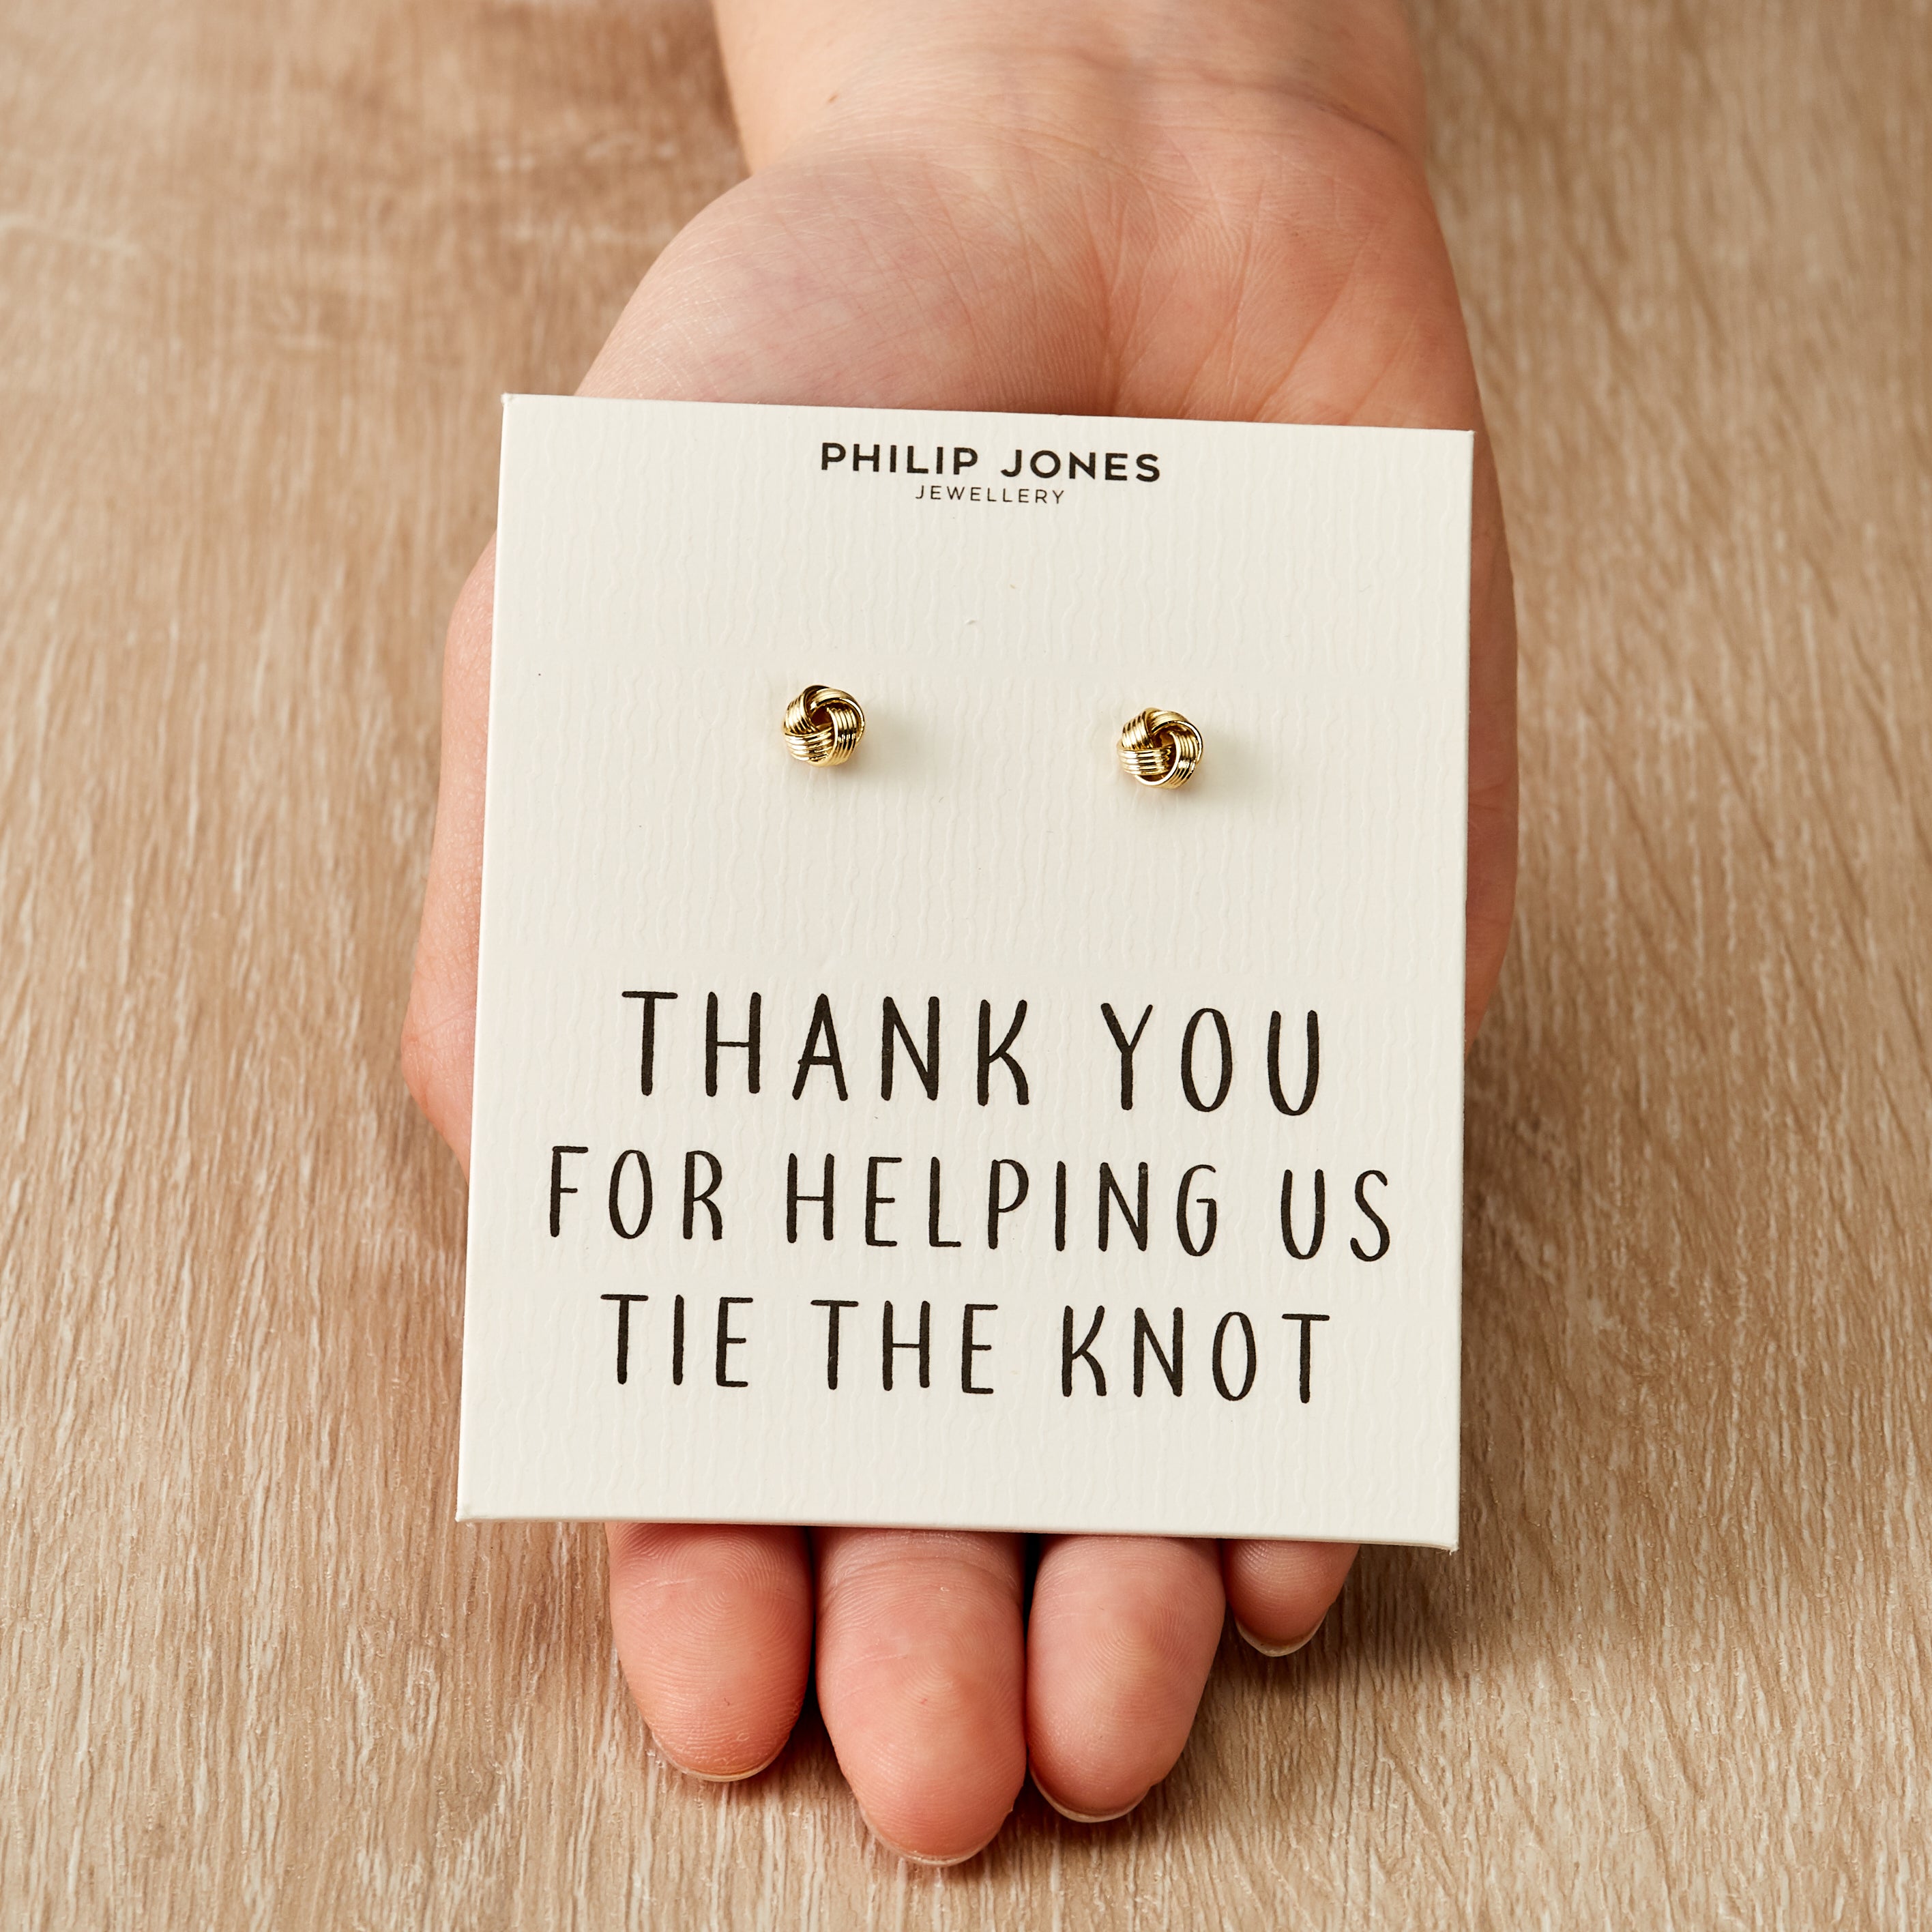 Gold Plated Thank You for Helping us Tie The Knot Earrings with Quote Card